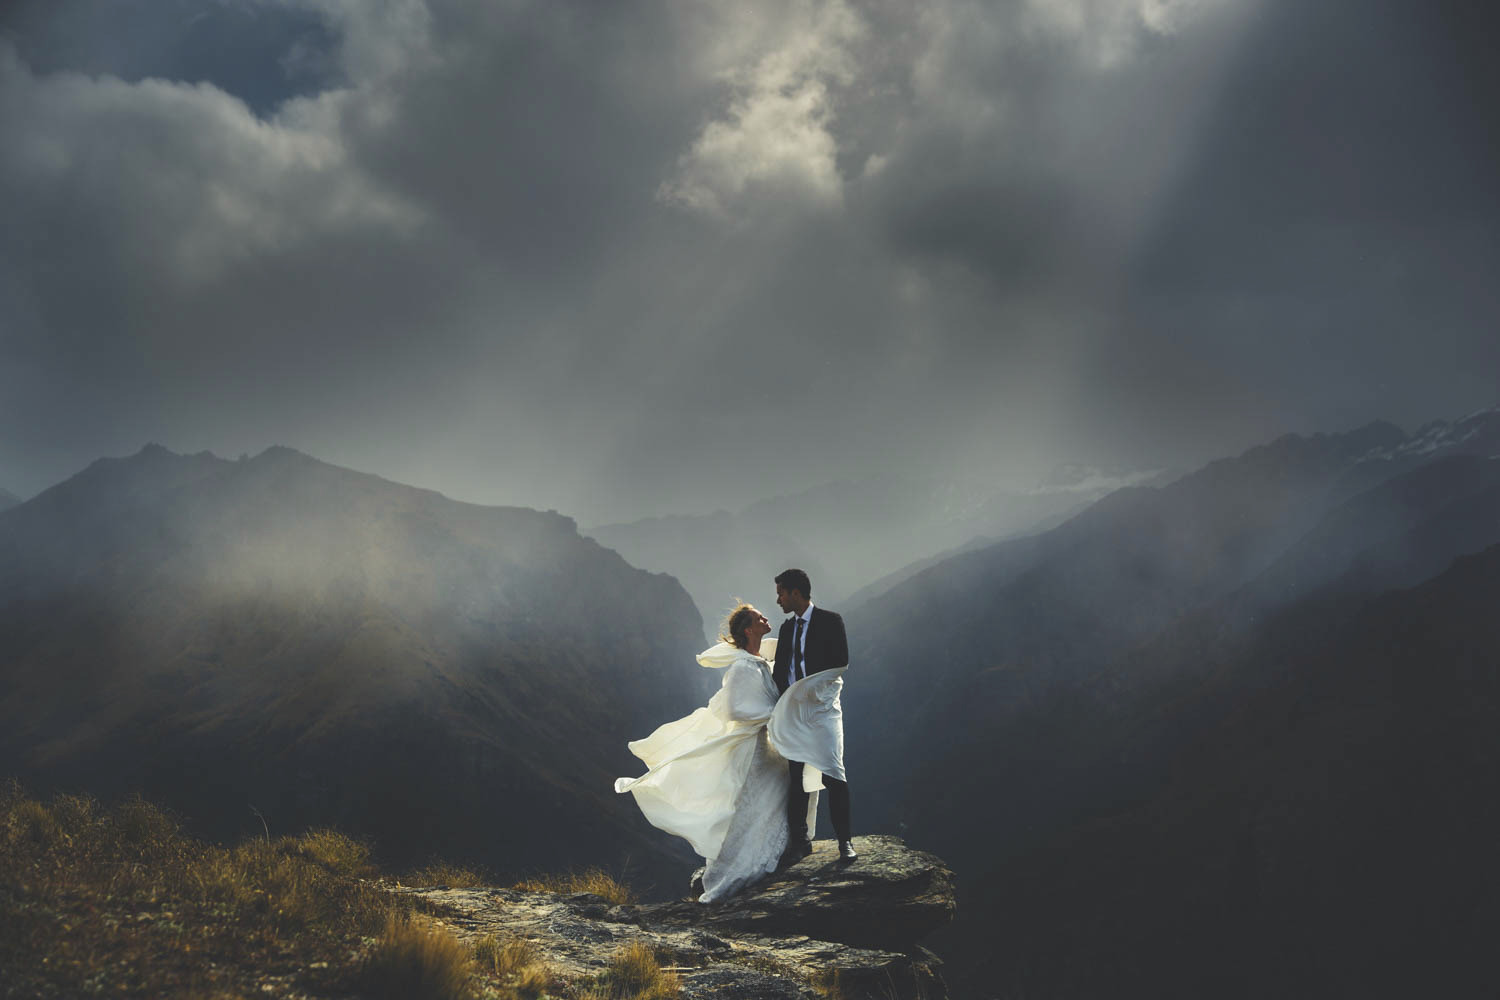 The Top 50 Wedding Photos of 2014 Curated by Junebug